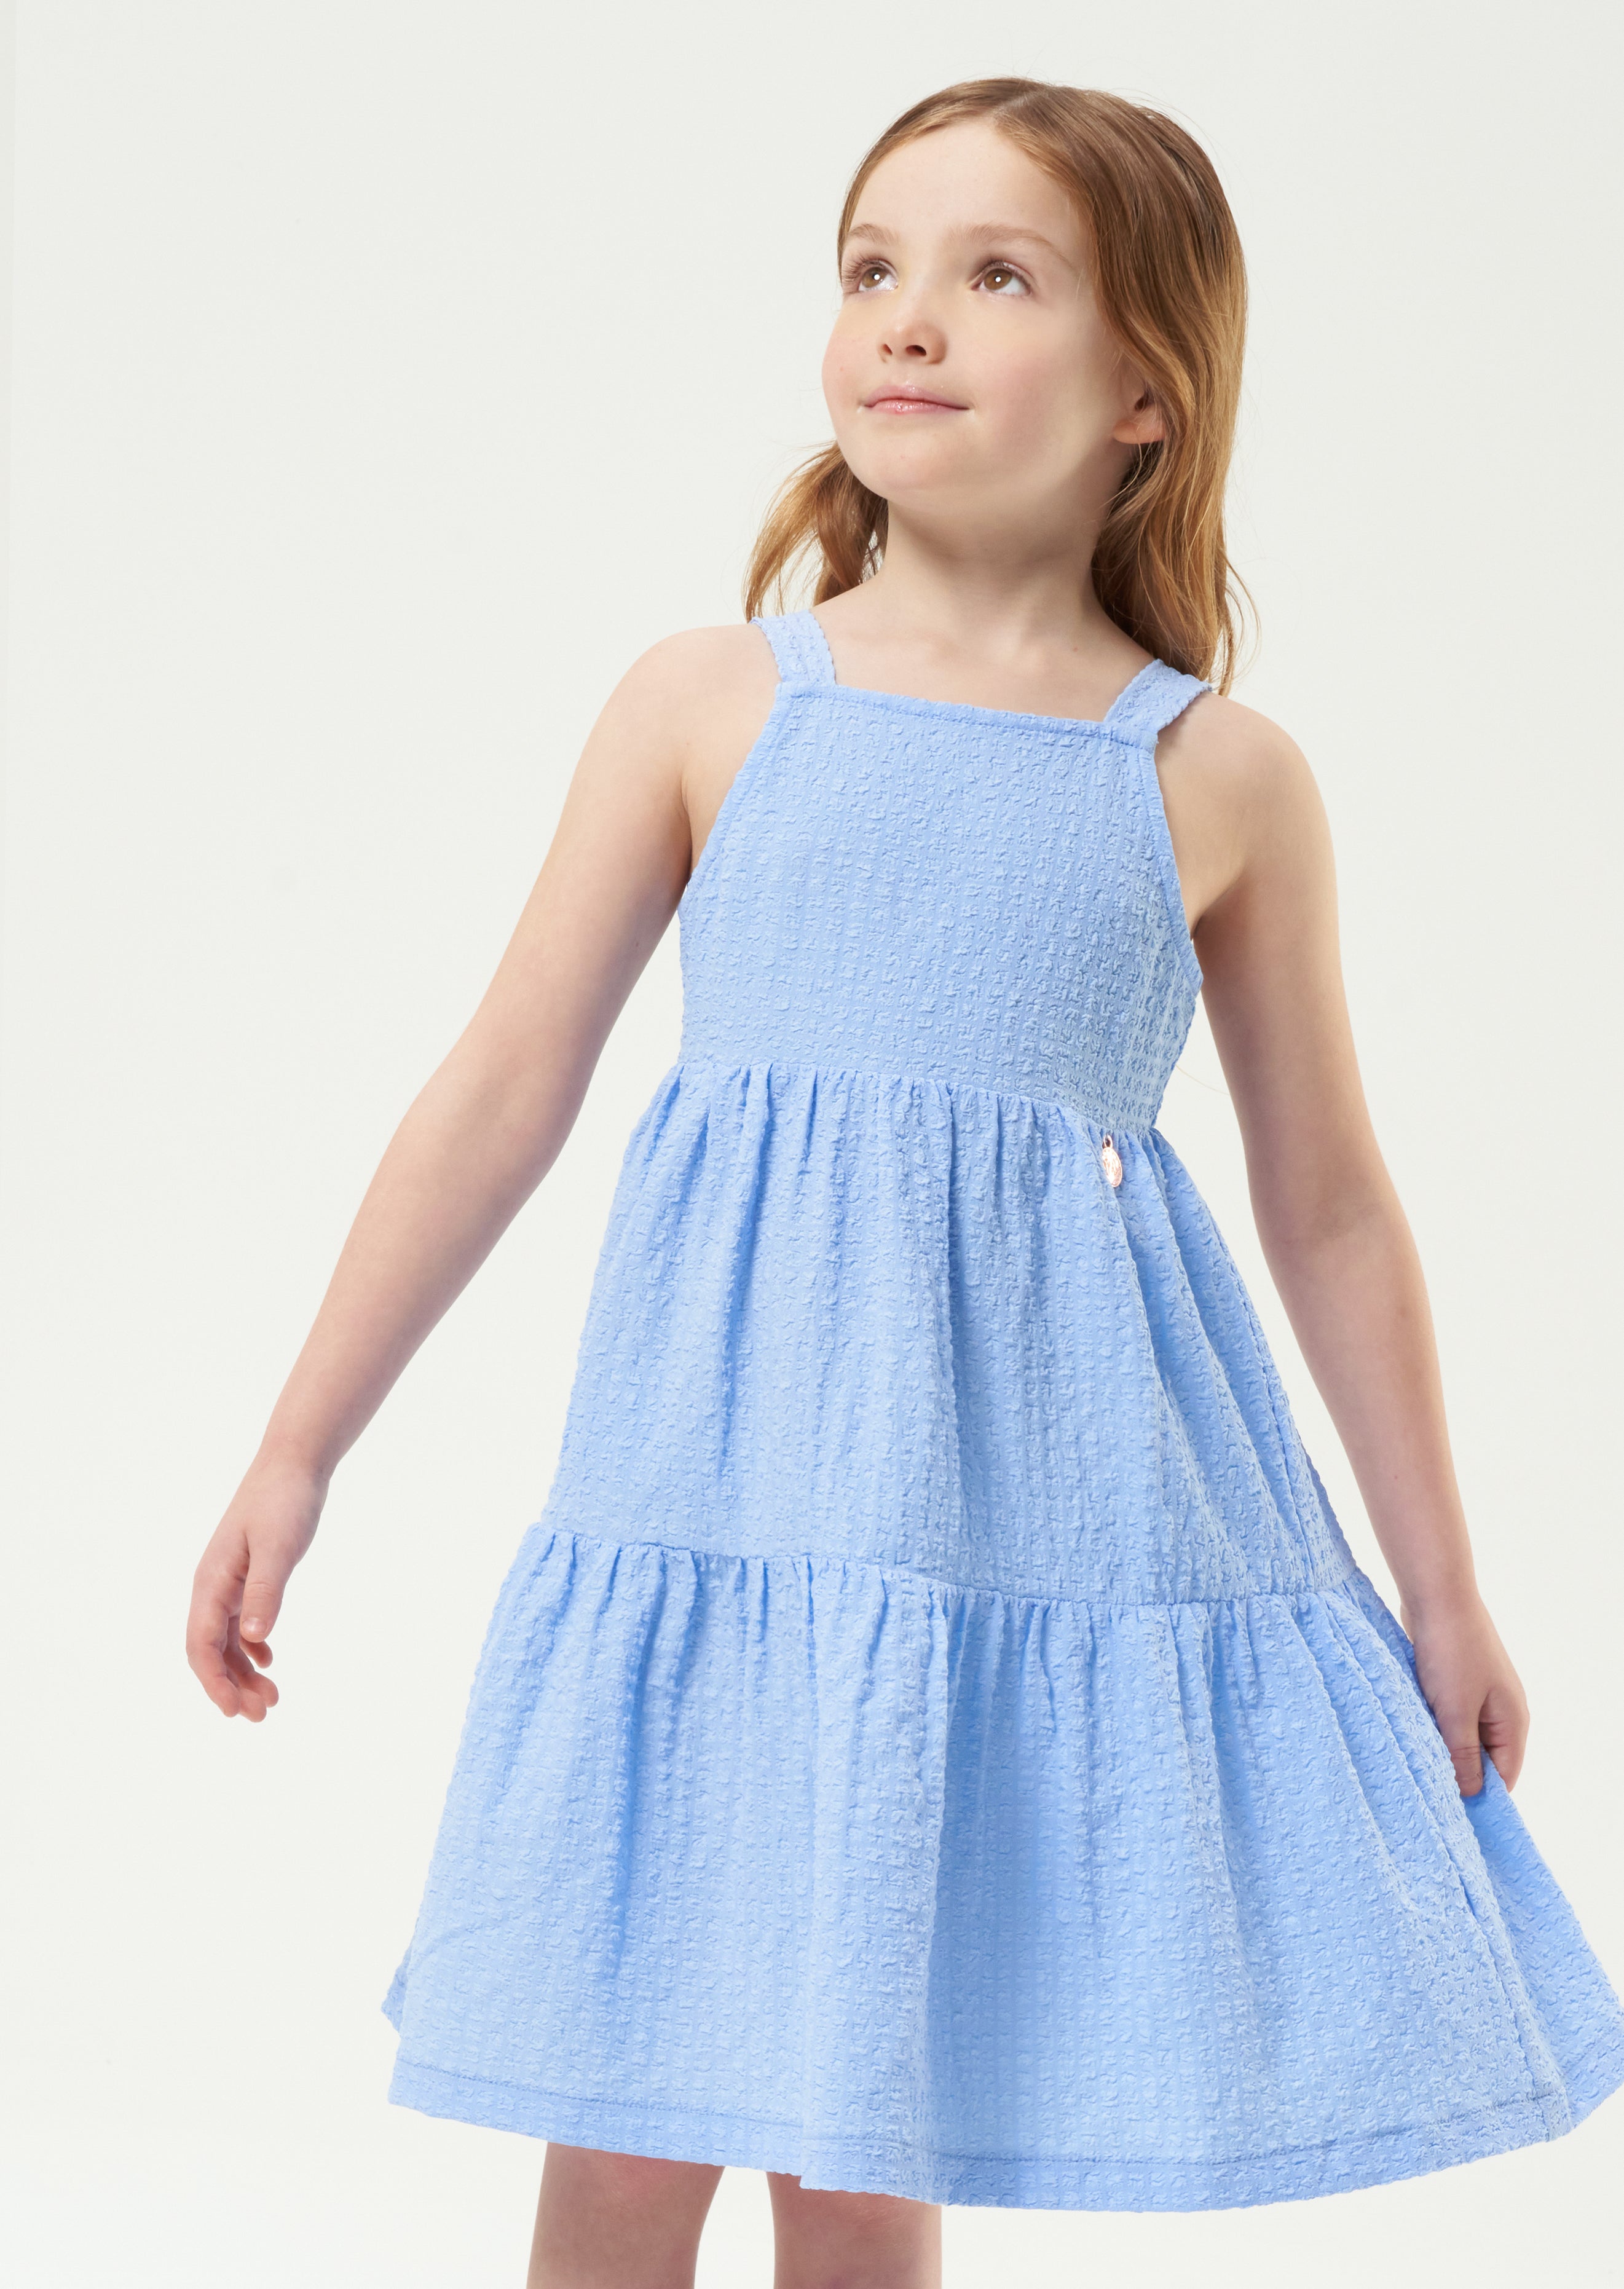 Girls Solid Blue Woven Dress with Back Tie